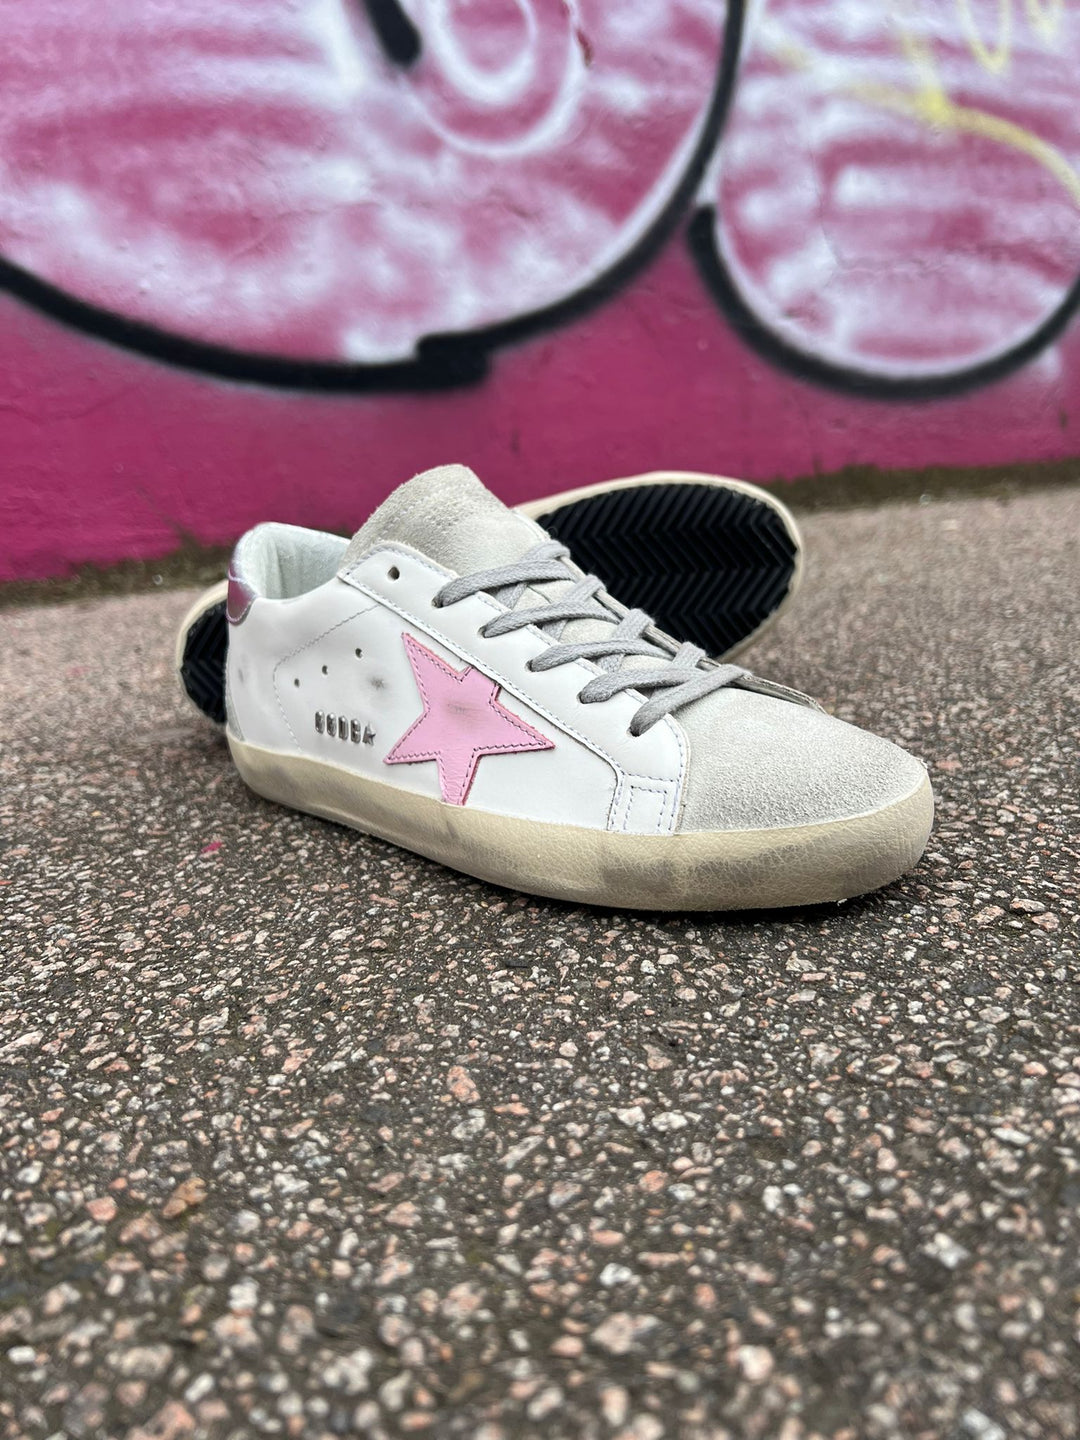 Womens Golden Goose Super Star from 4Feetshoes.com